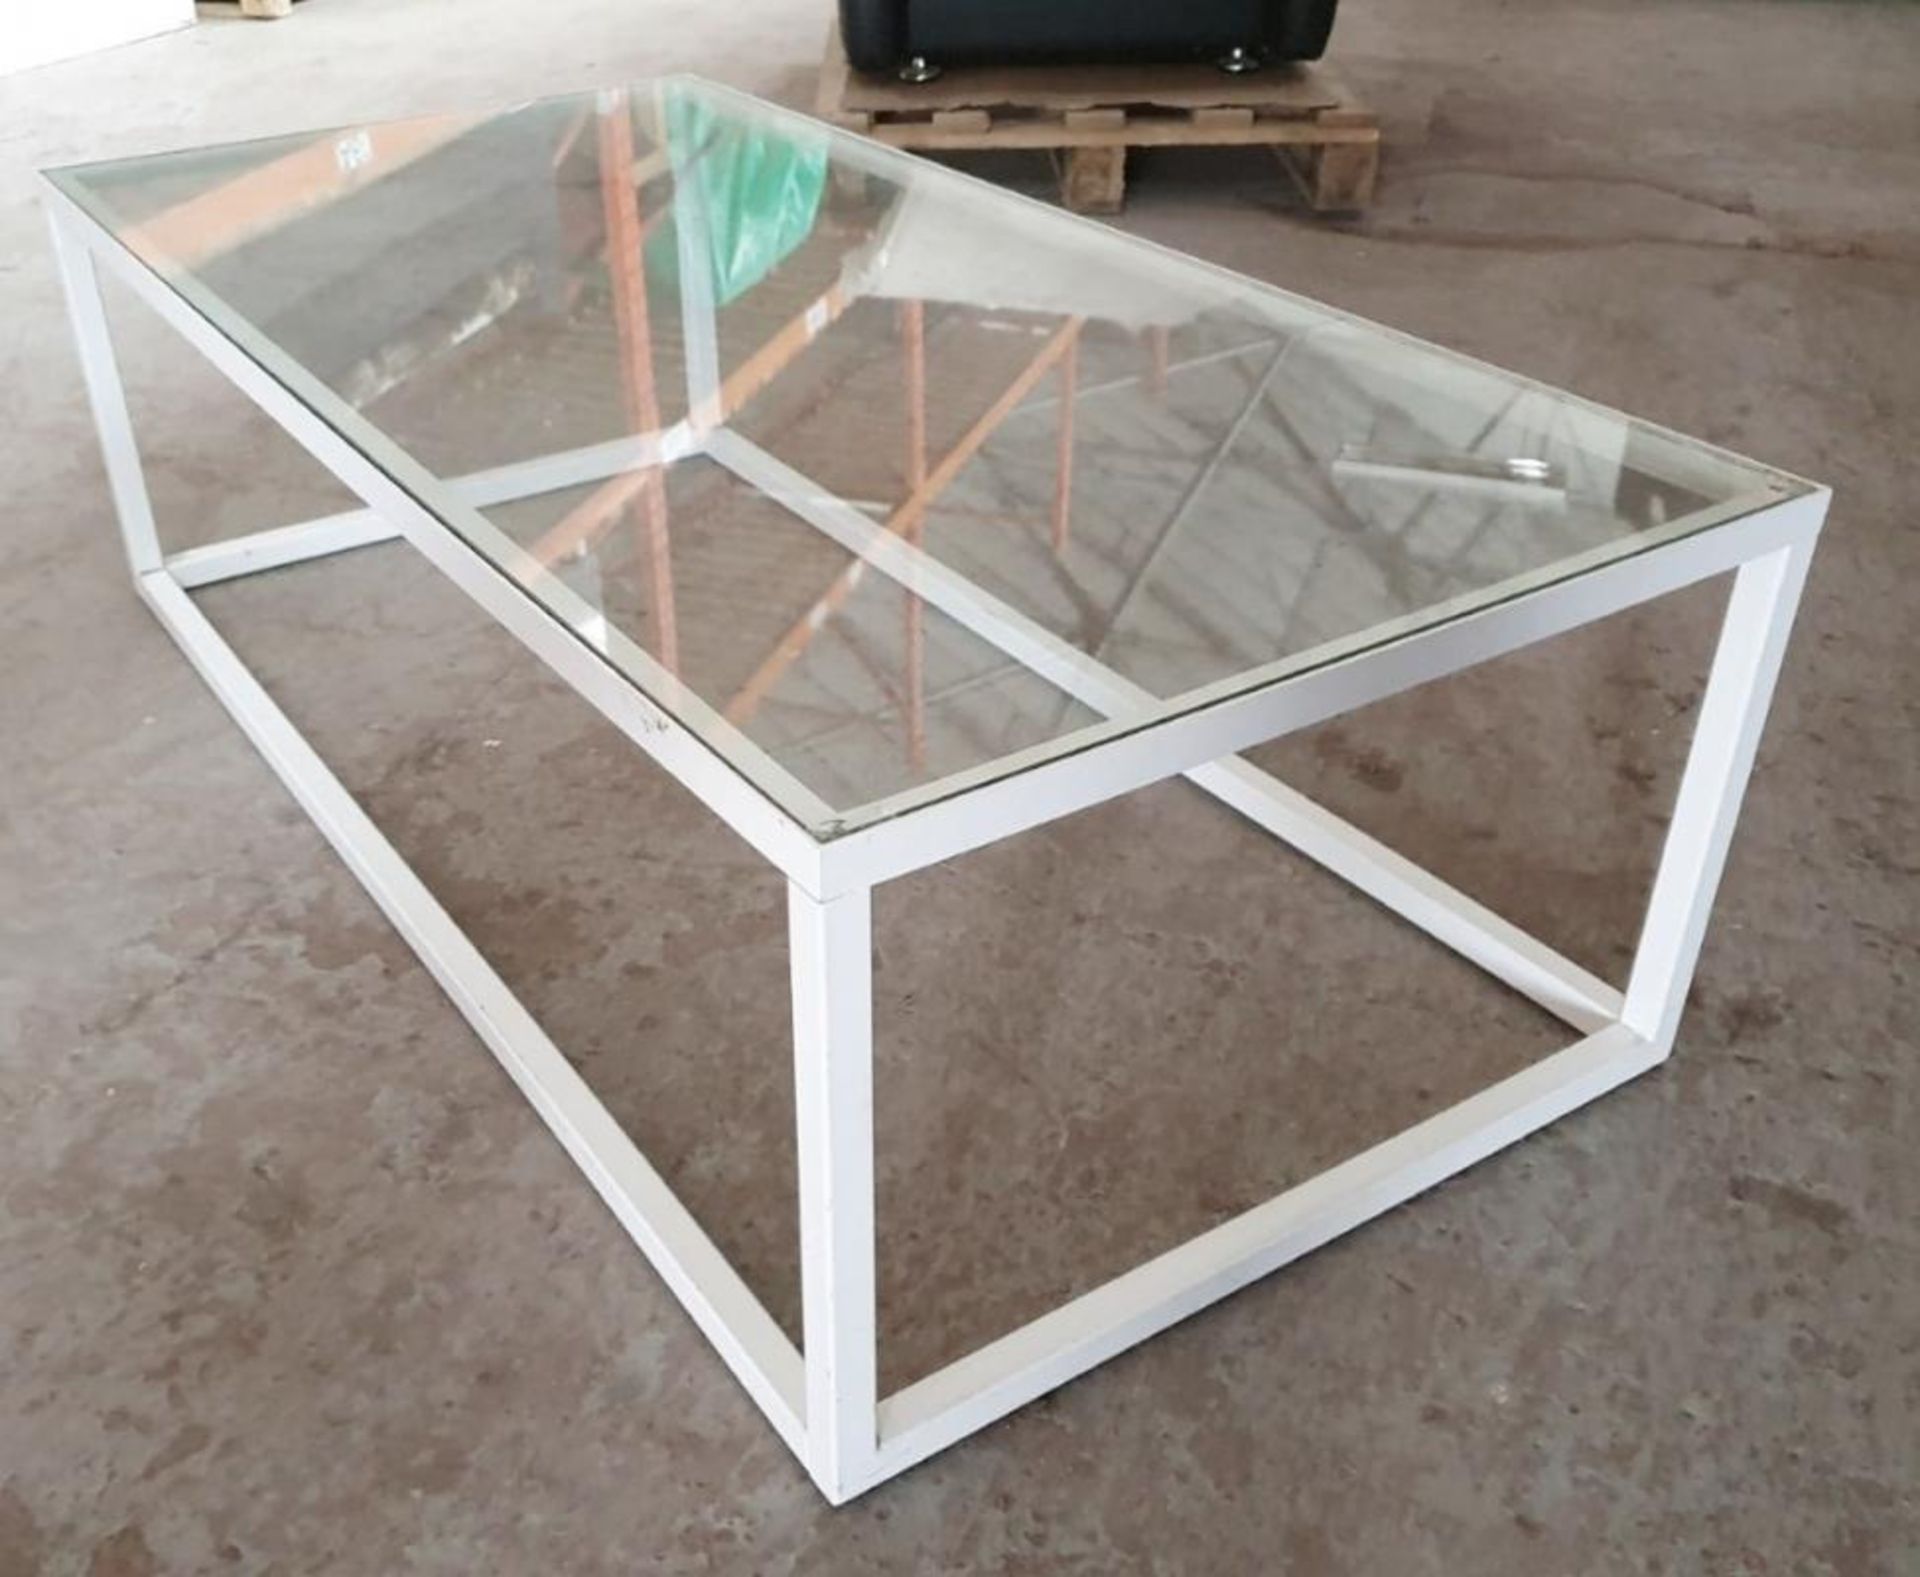 1 x Rectangular Glass-Topped Coffee Table - Pre-owned Item - £1 Start, No Reserve